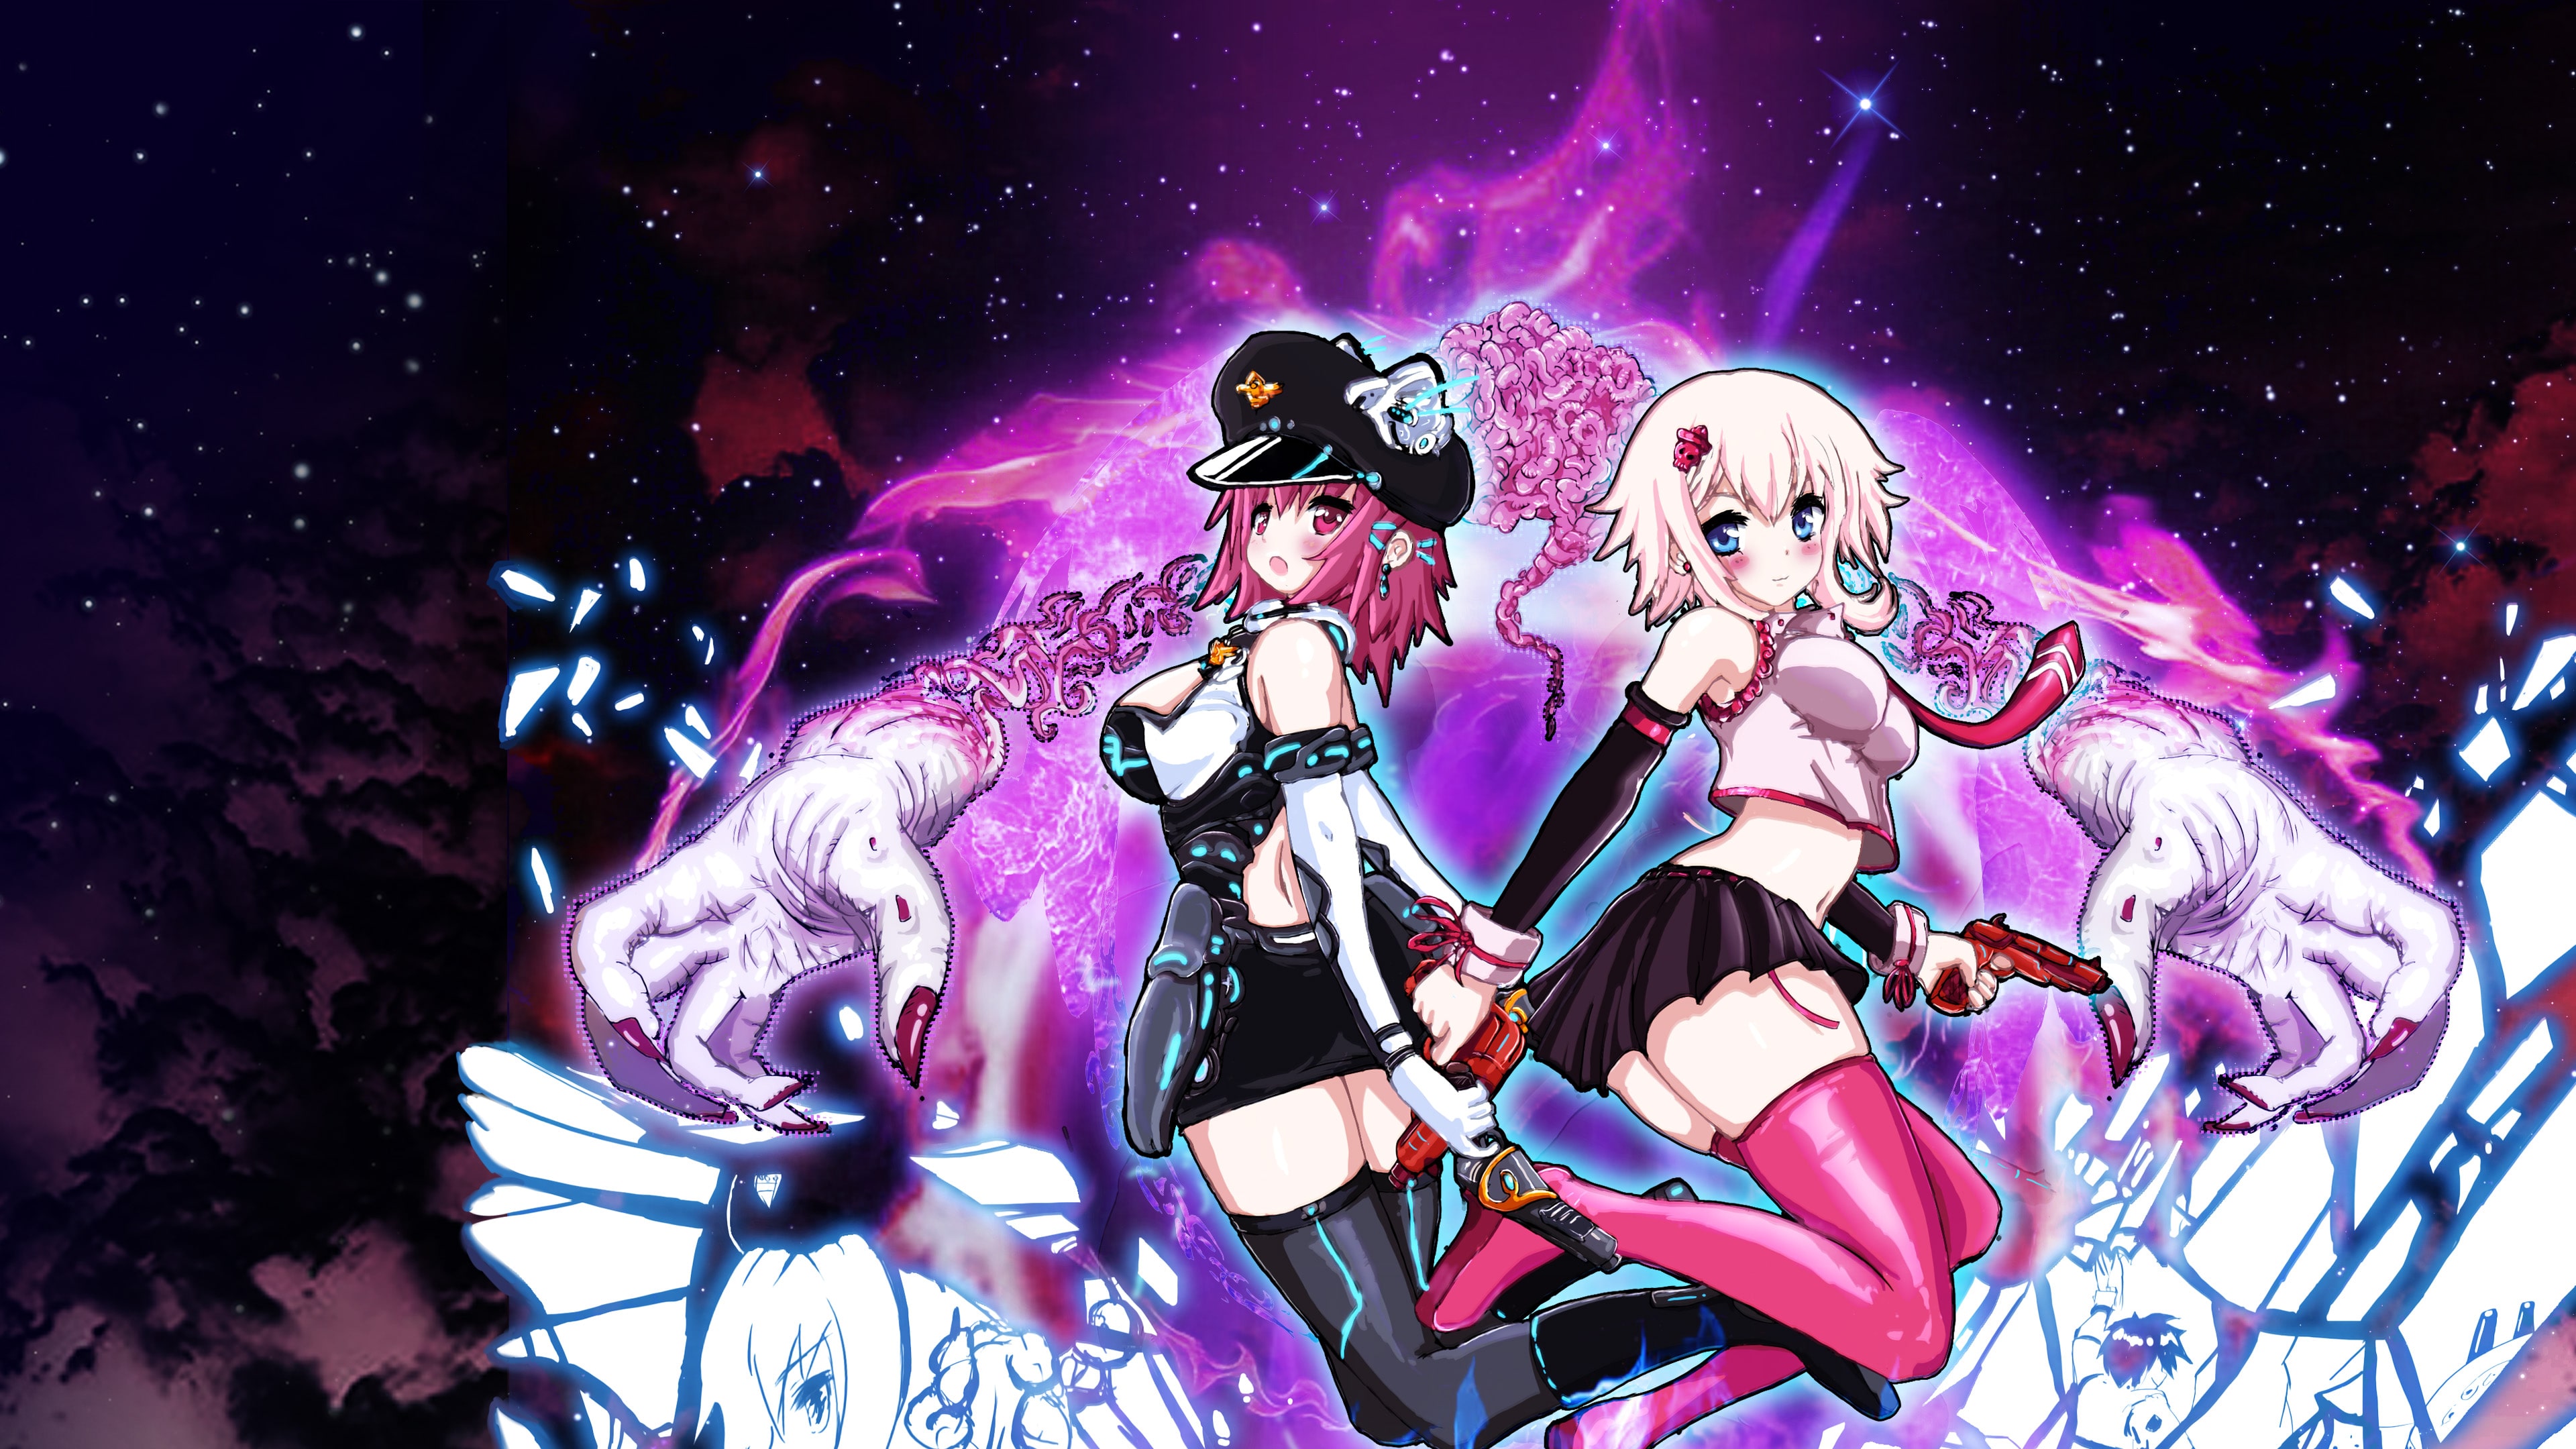 Riddled Corpses EX PS4 & PS5